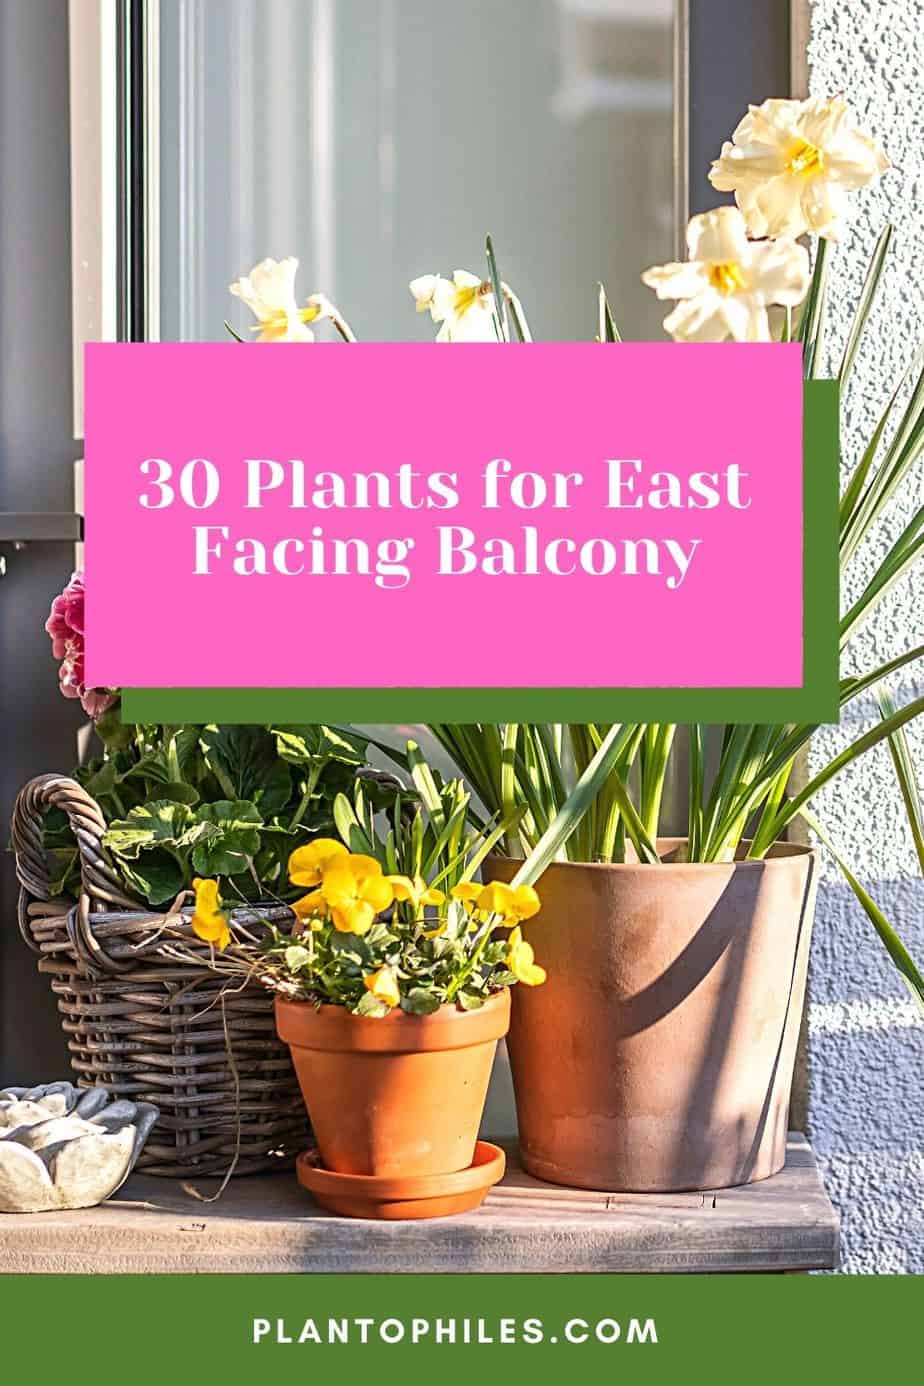 30 Plants for East Facing Balcony